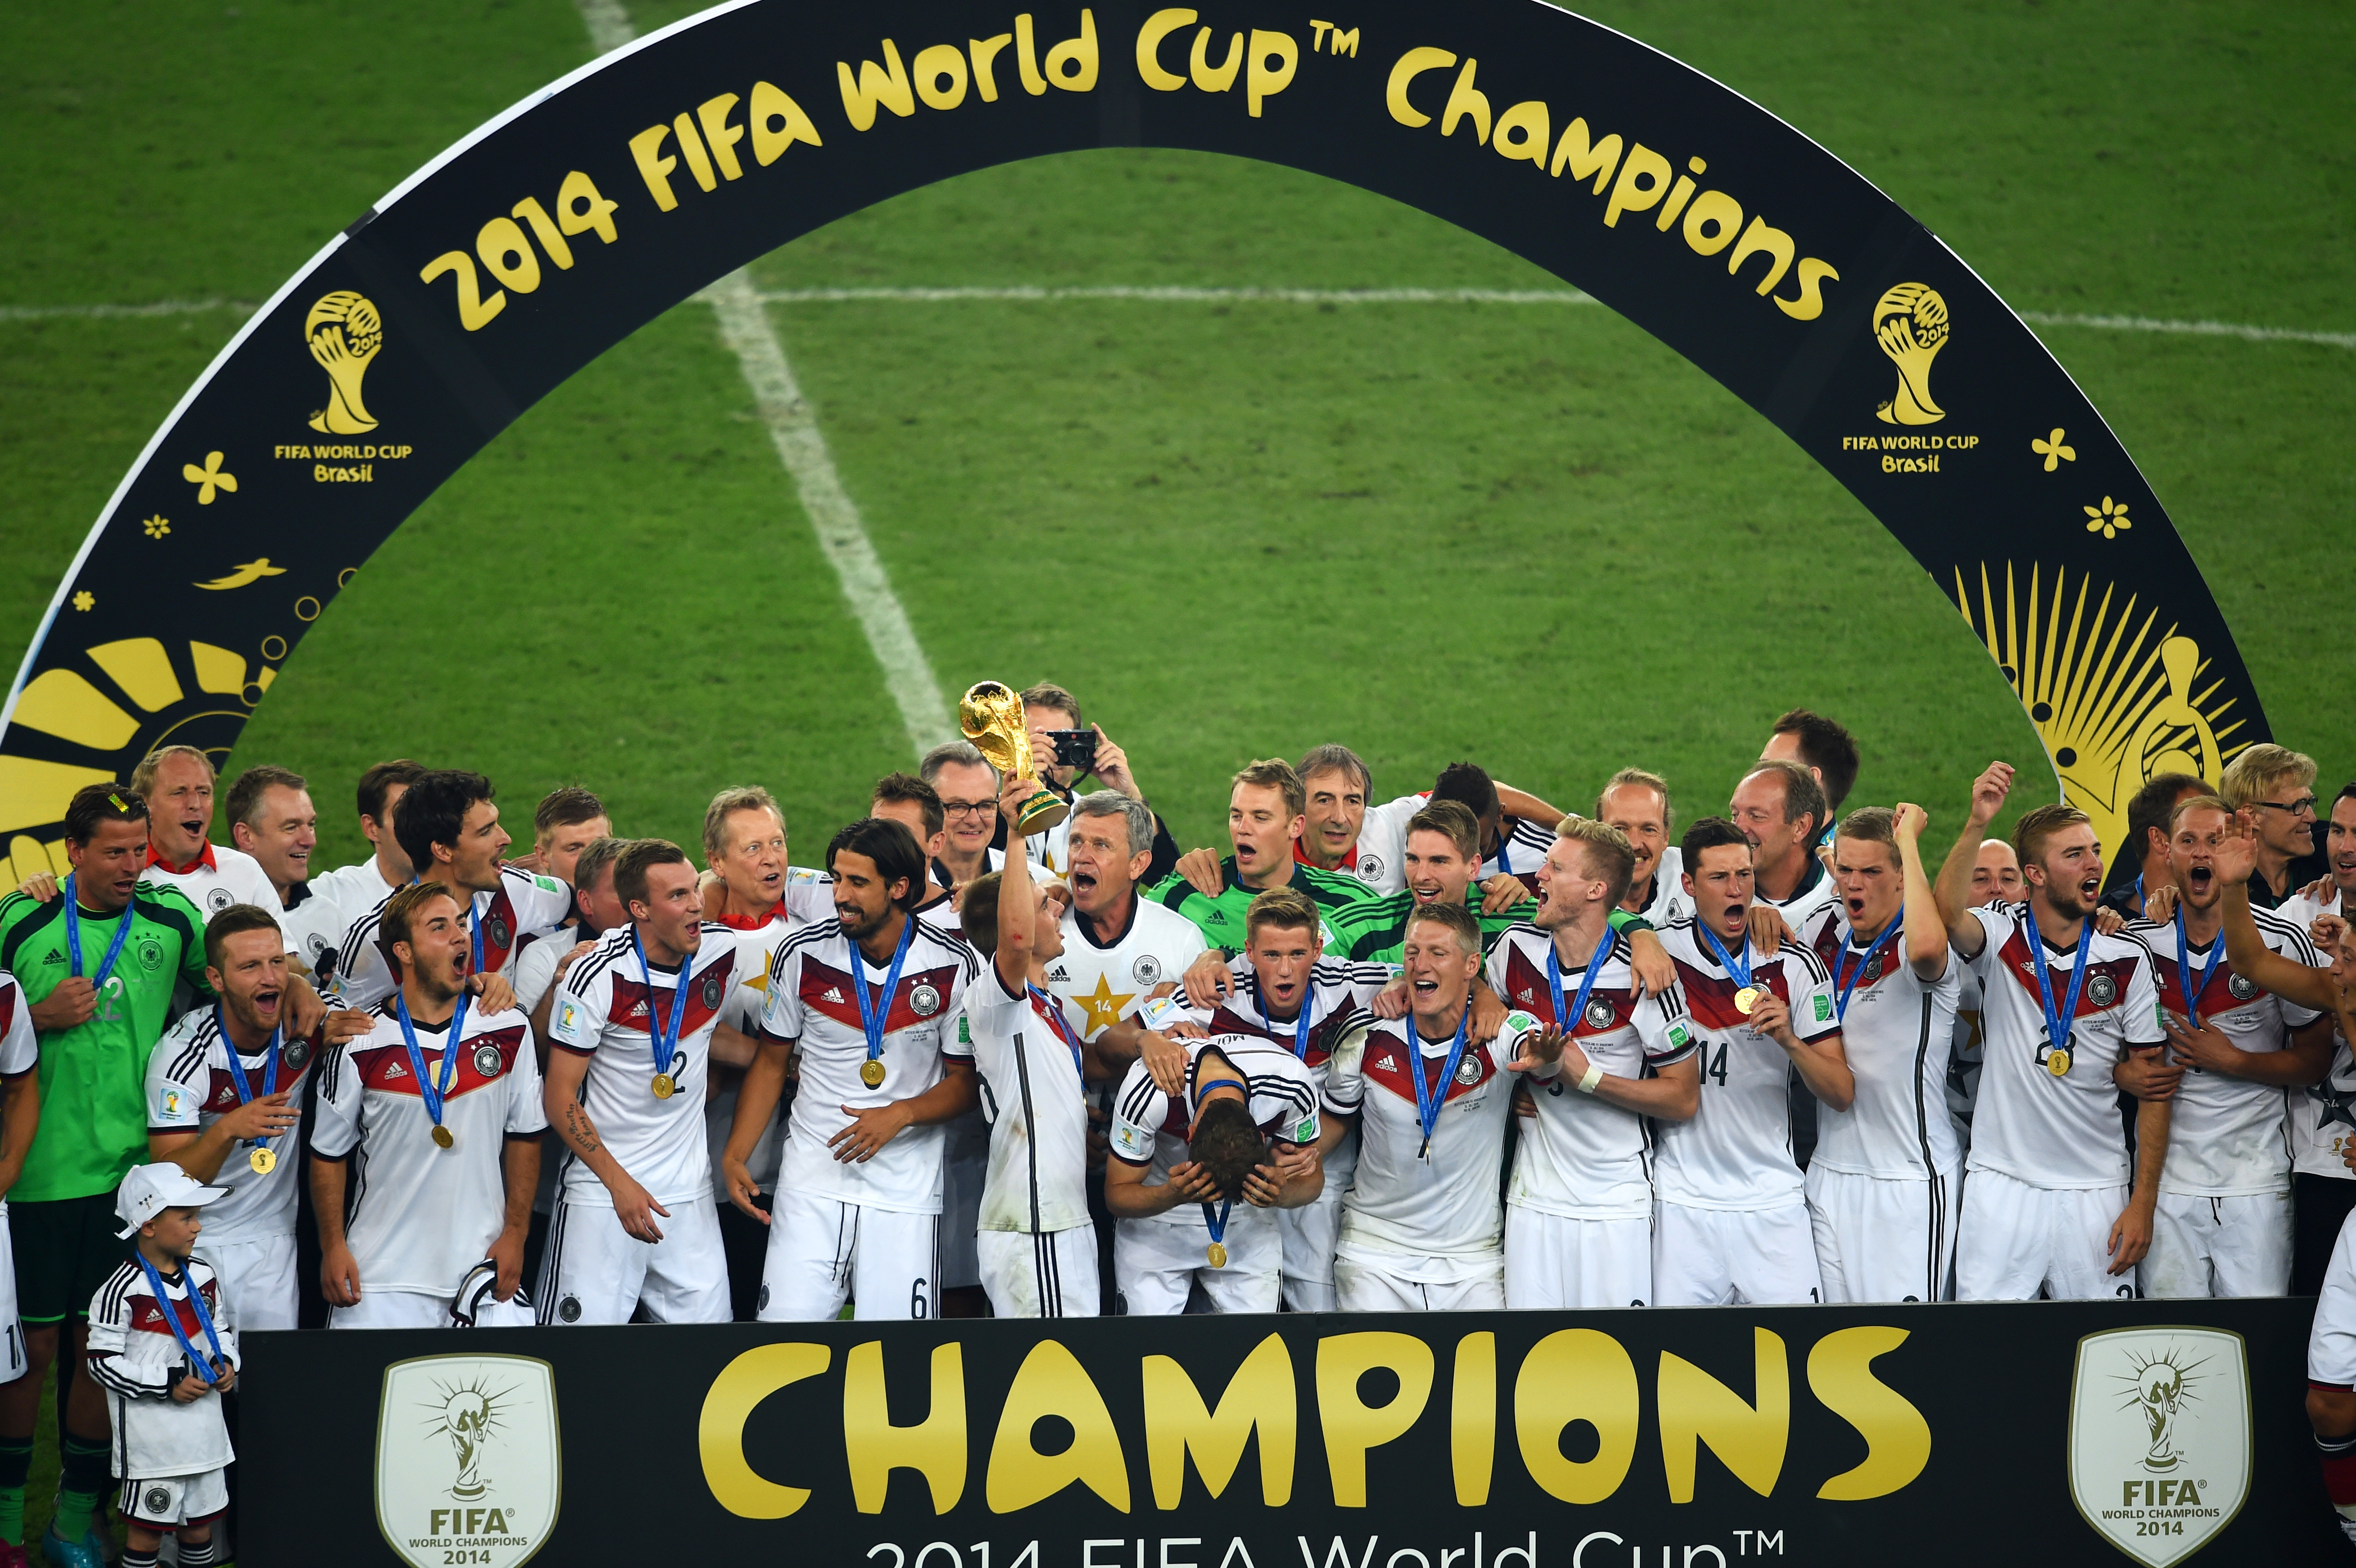 FIFA World Cup 2014 Photo Gallery, News, Images, Pictures - NDTV Sports